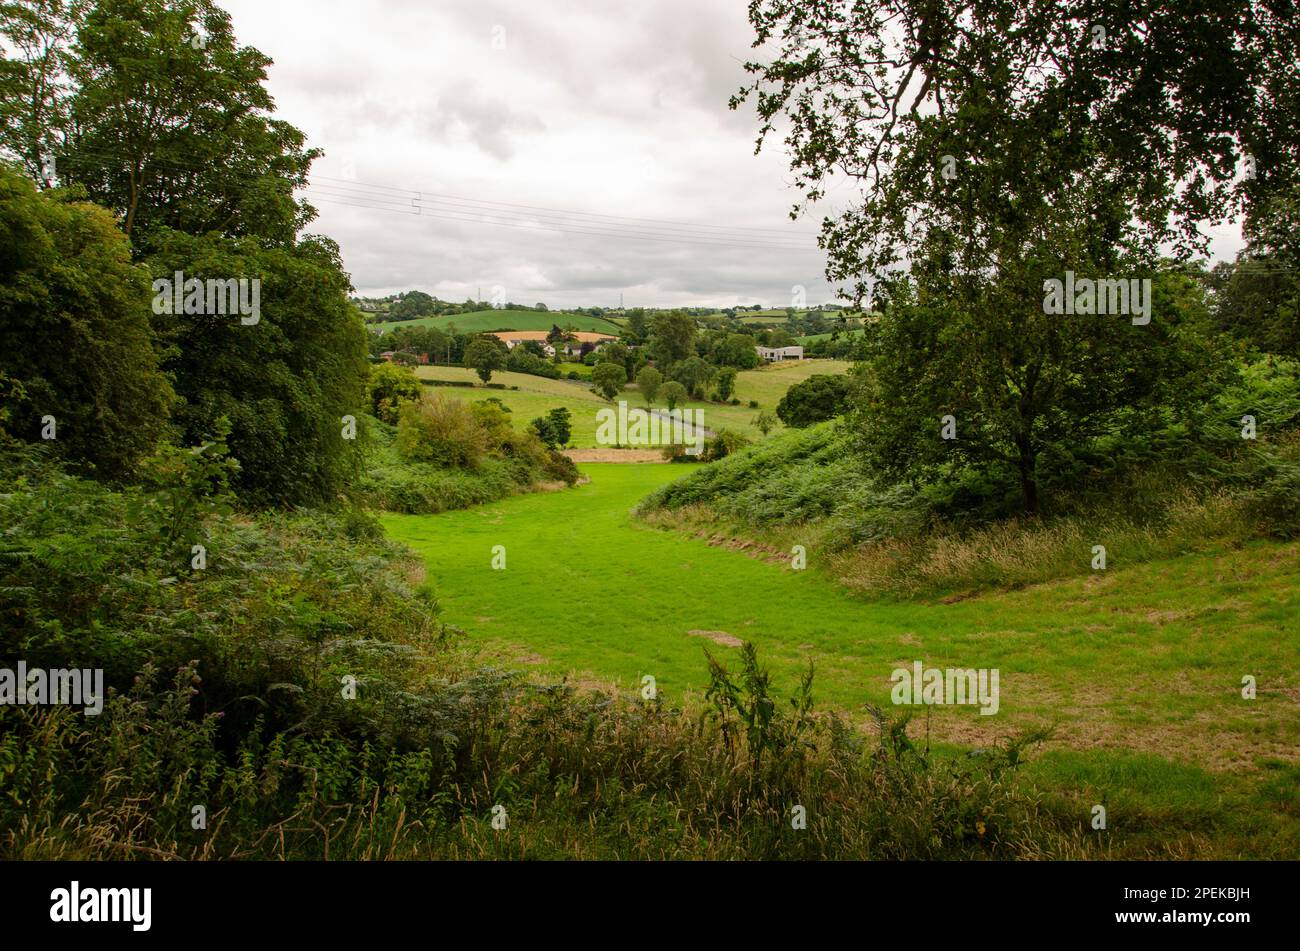 Small green valley lined with trees and a cloudy sky in the background near the River Lagan County Down Northern Ireland Stock Photo